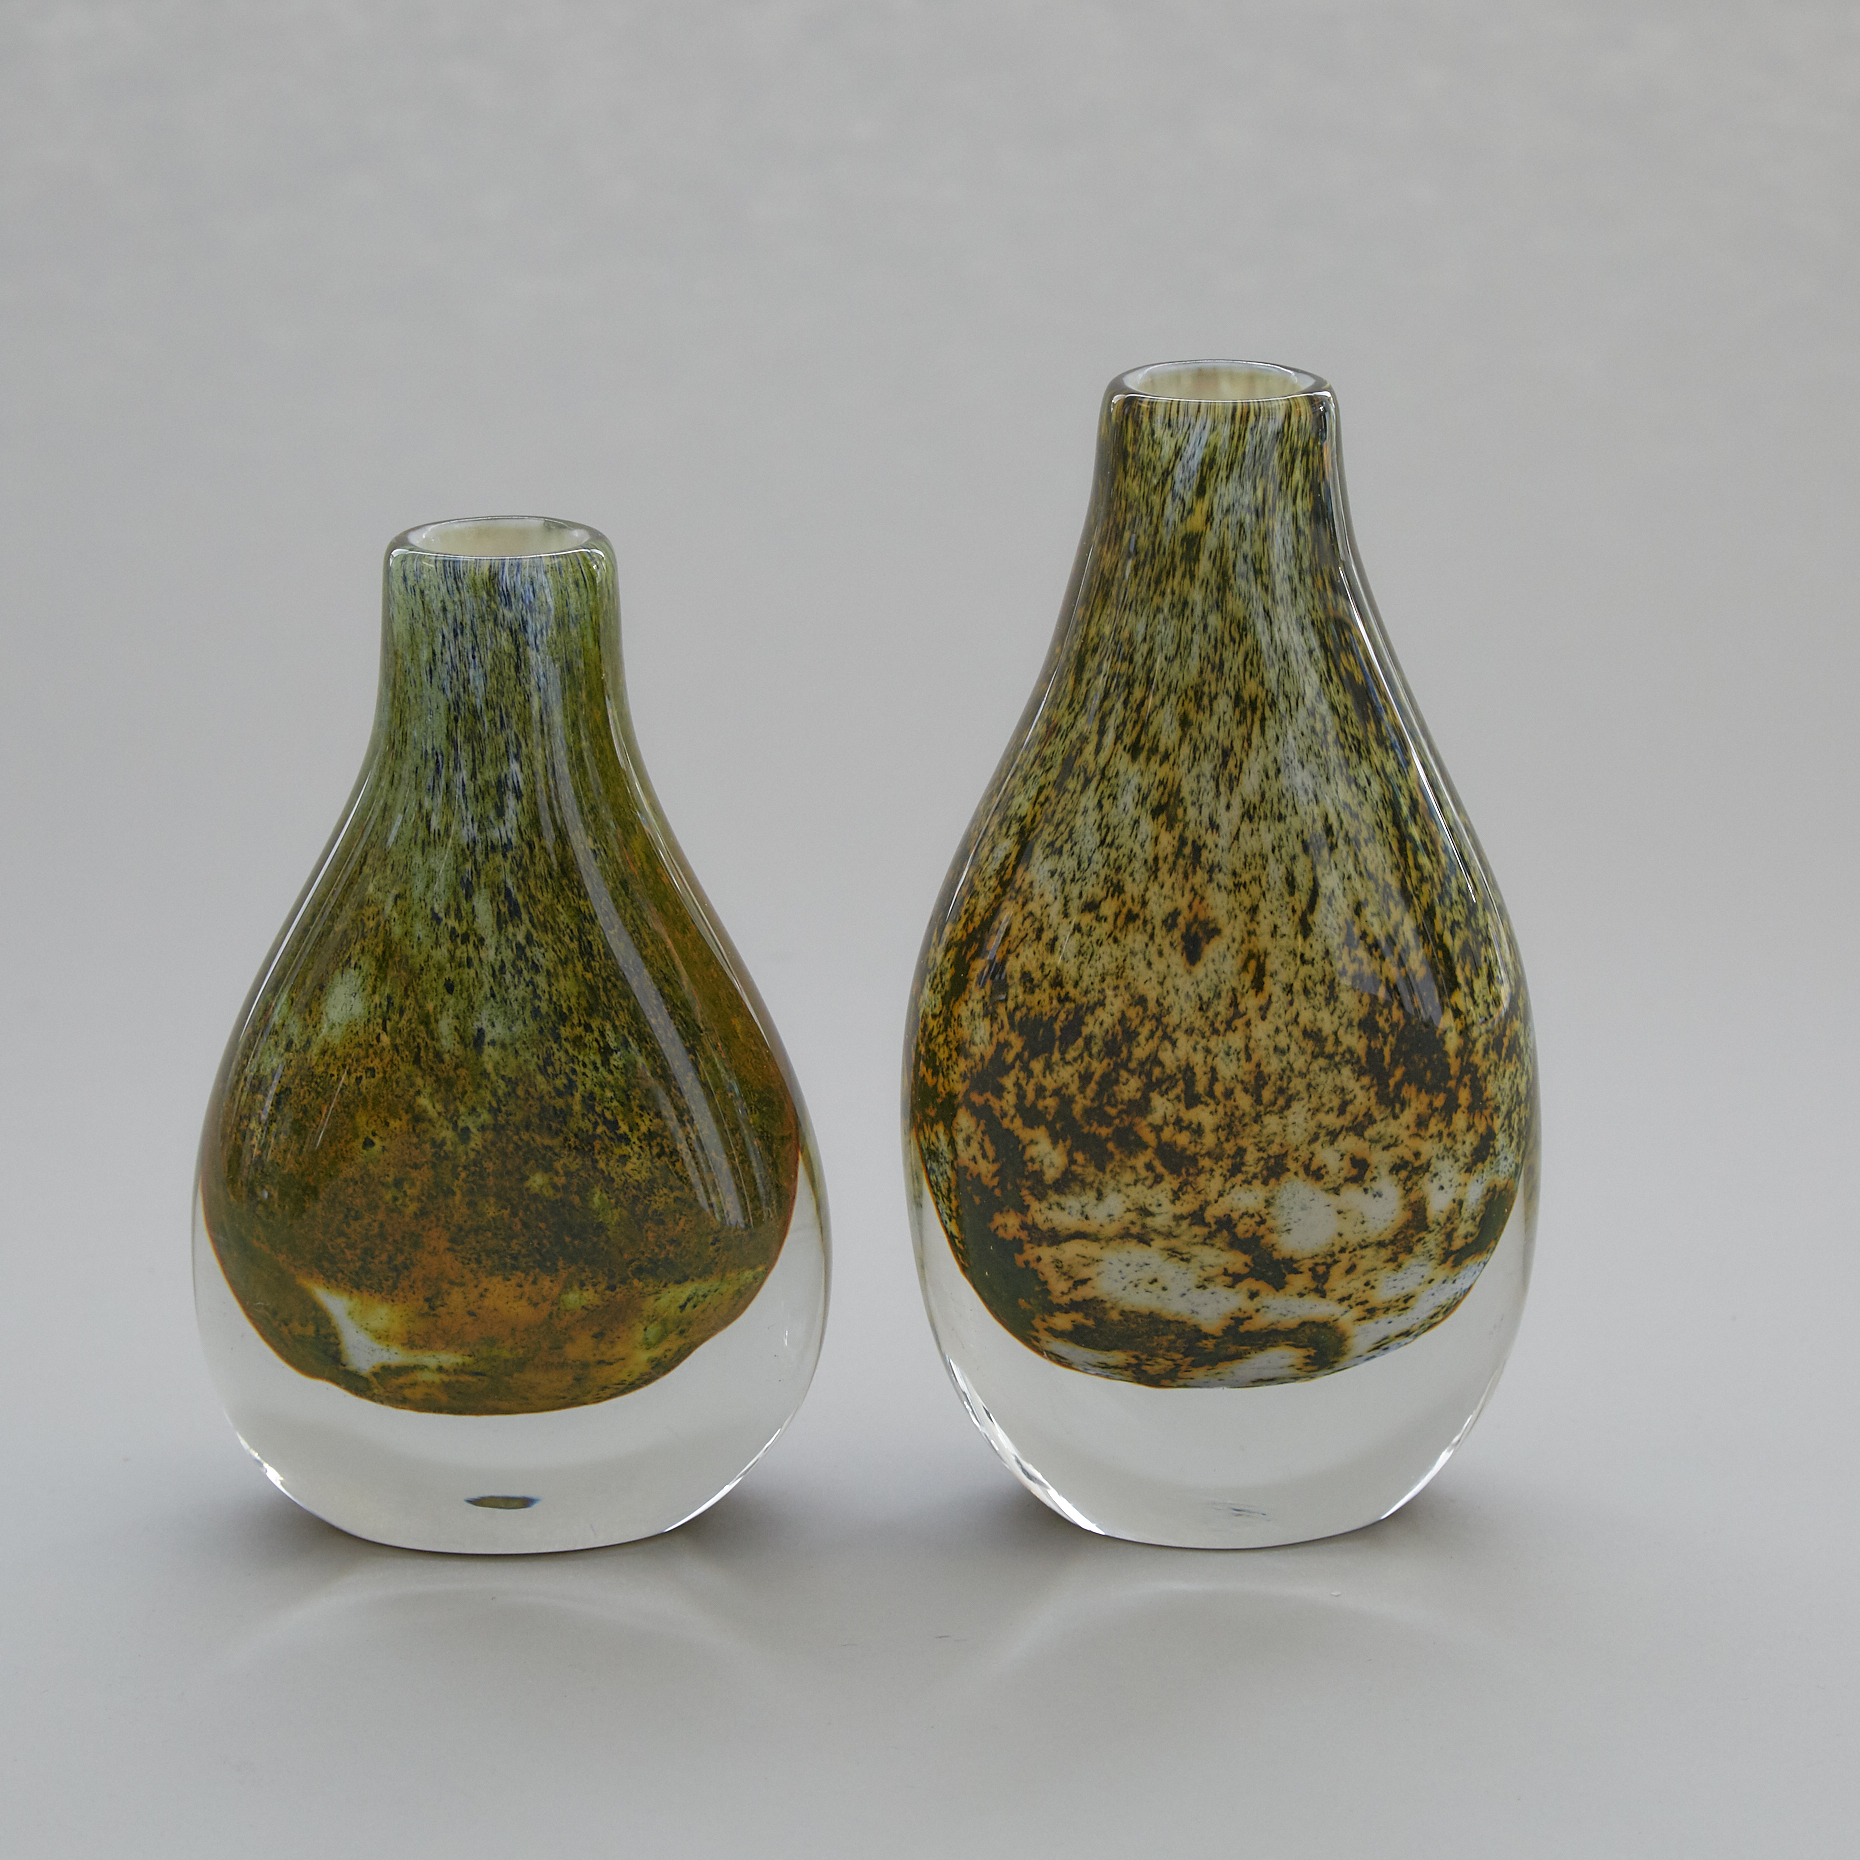 Toan Klein (American/Canadian, b.1949), Two Internally Decorated Glass Vases, 1978